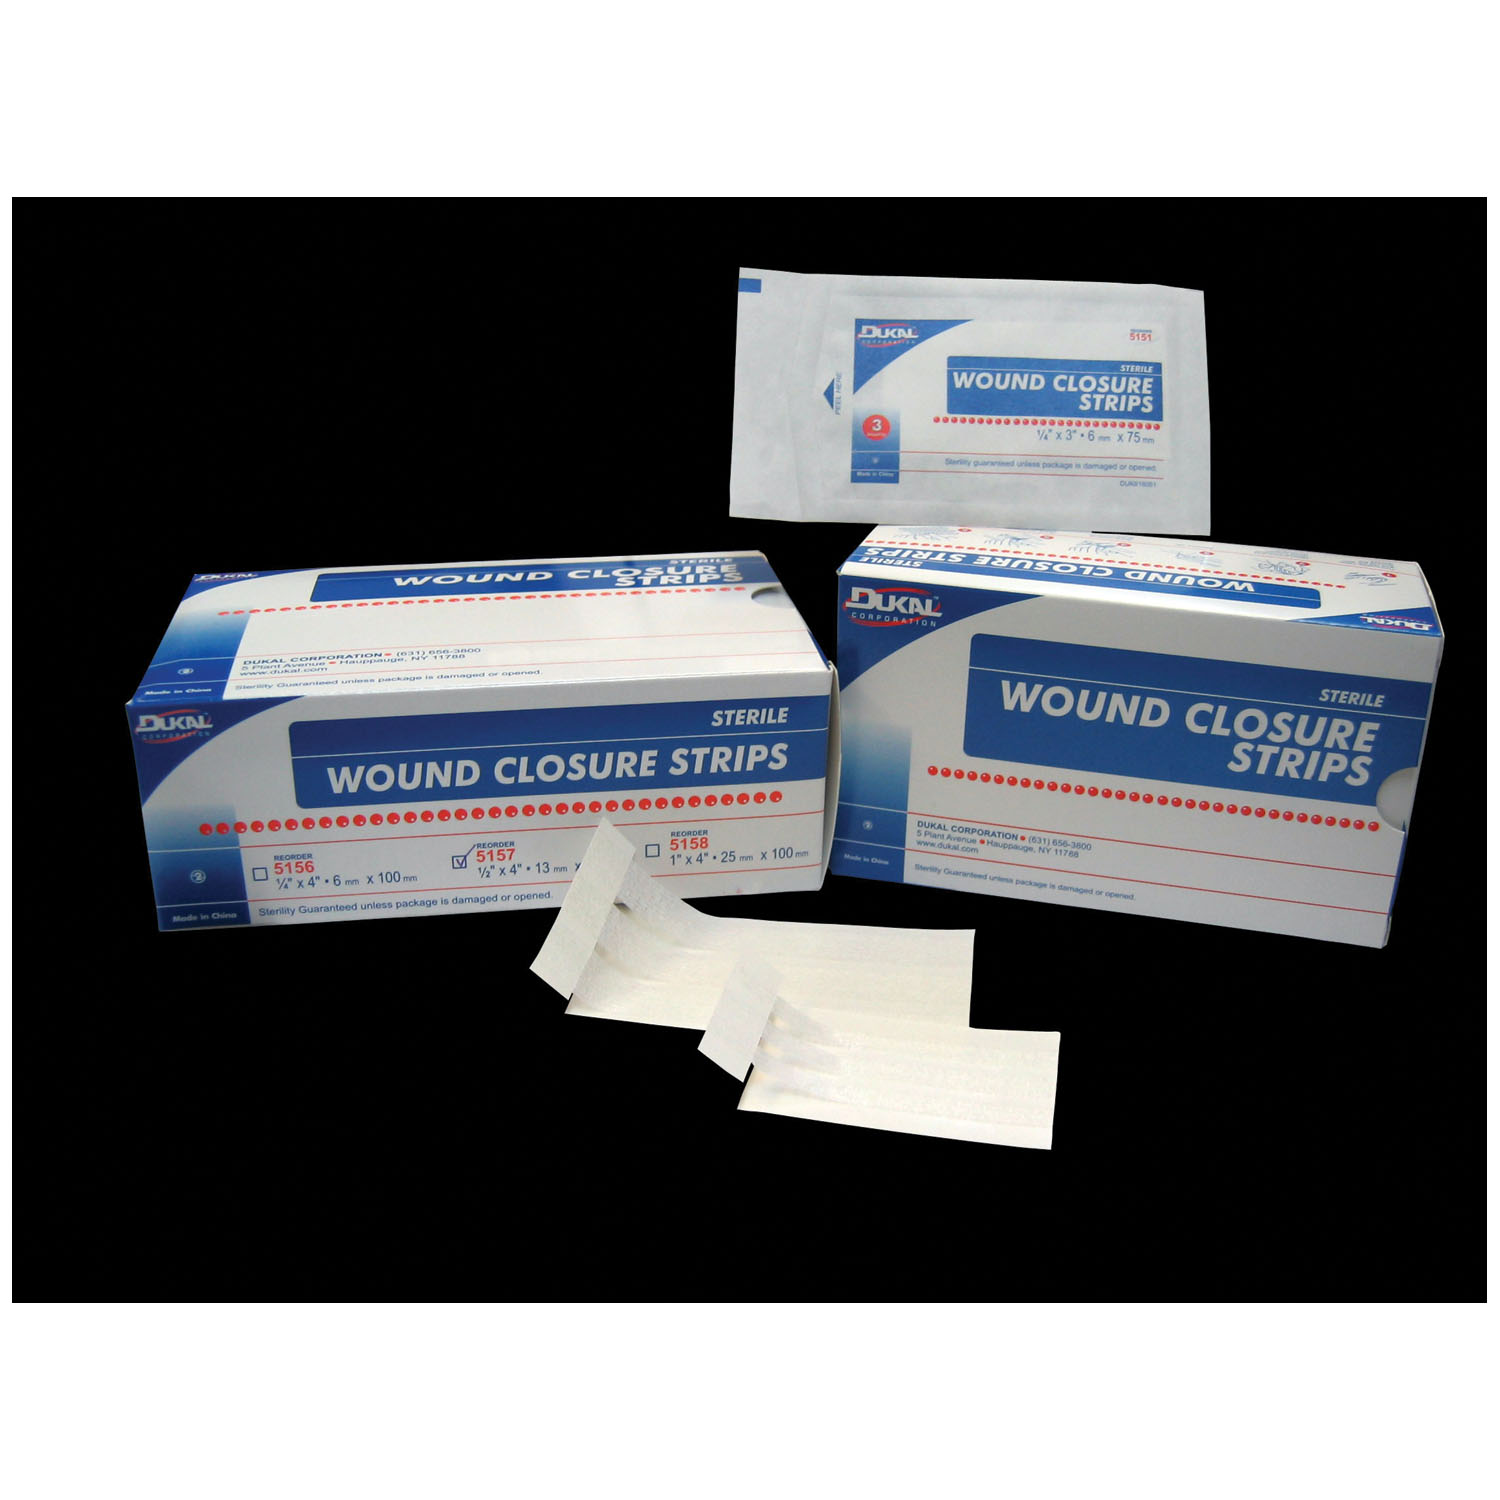 DUKAL WOUND CLOSURE STRIPS : 5150 BX $41.05 Stocked